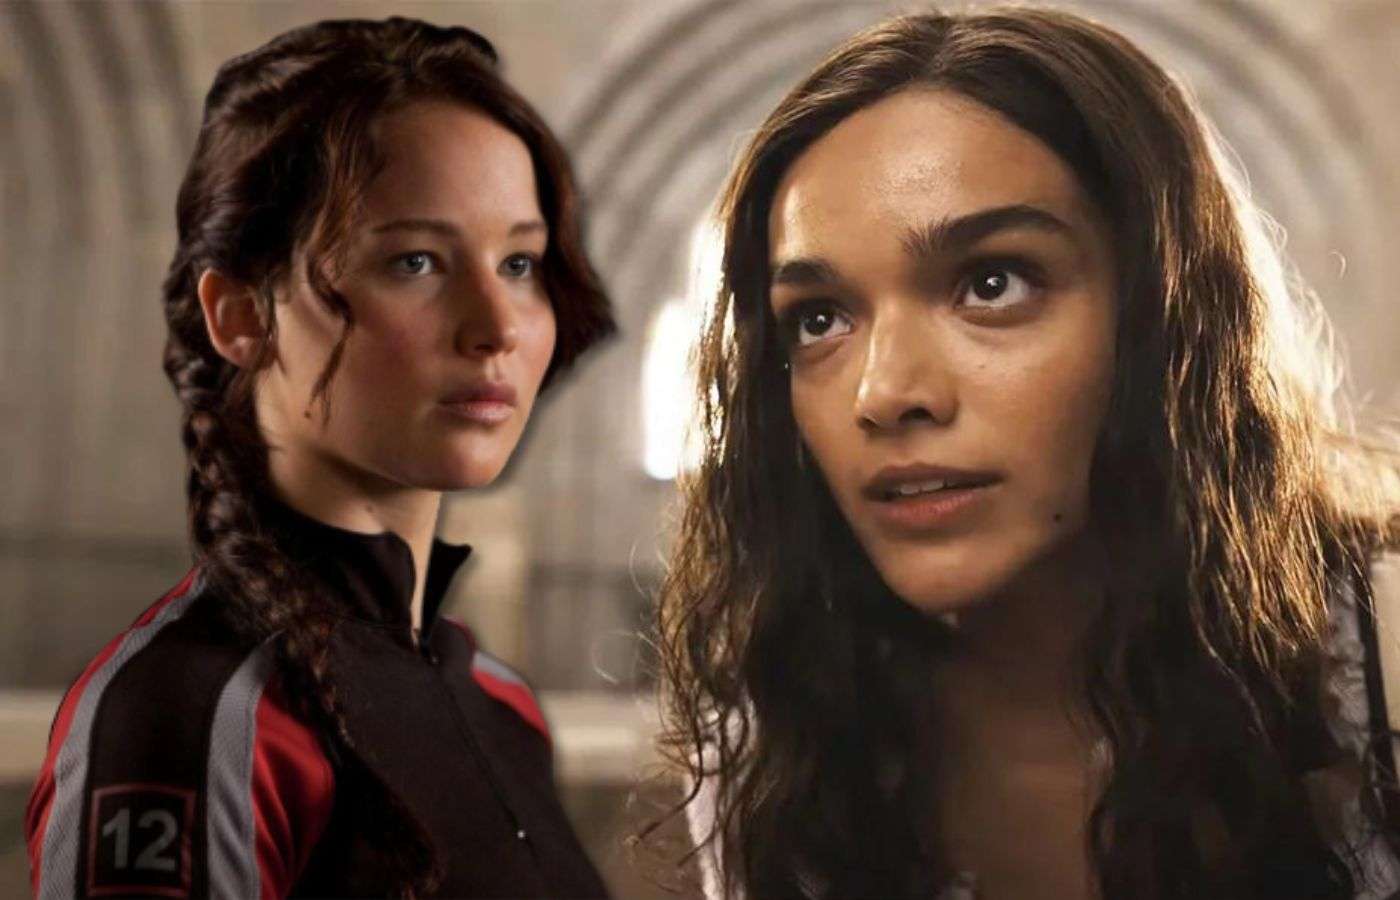 Katniss and Lucy in The Hunger Games movies